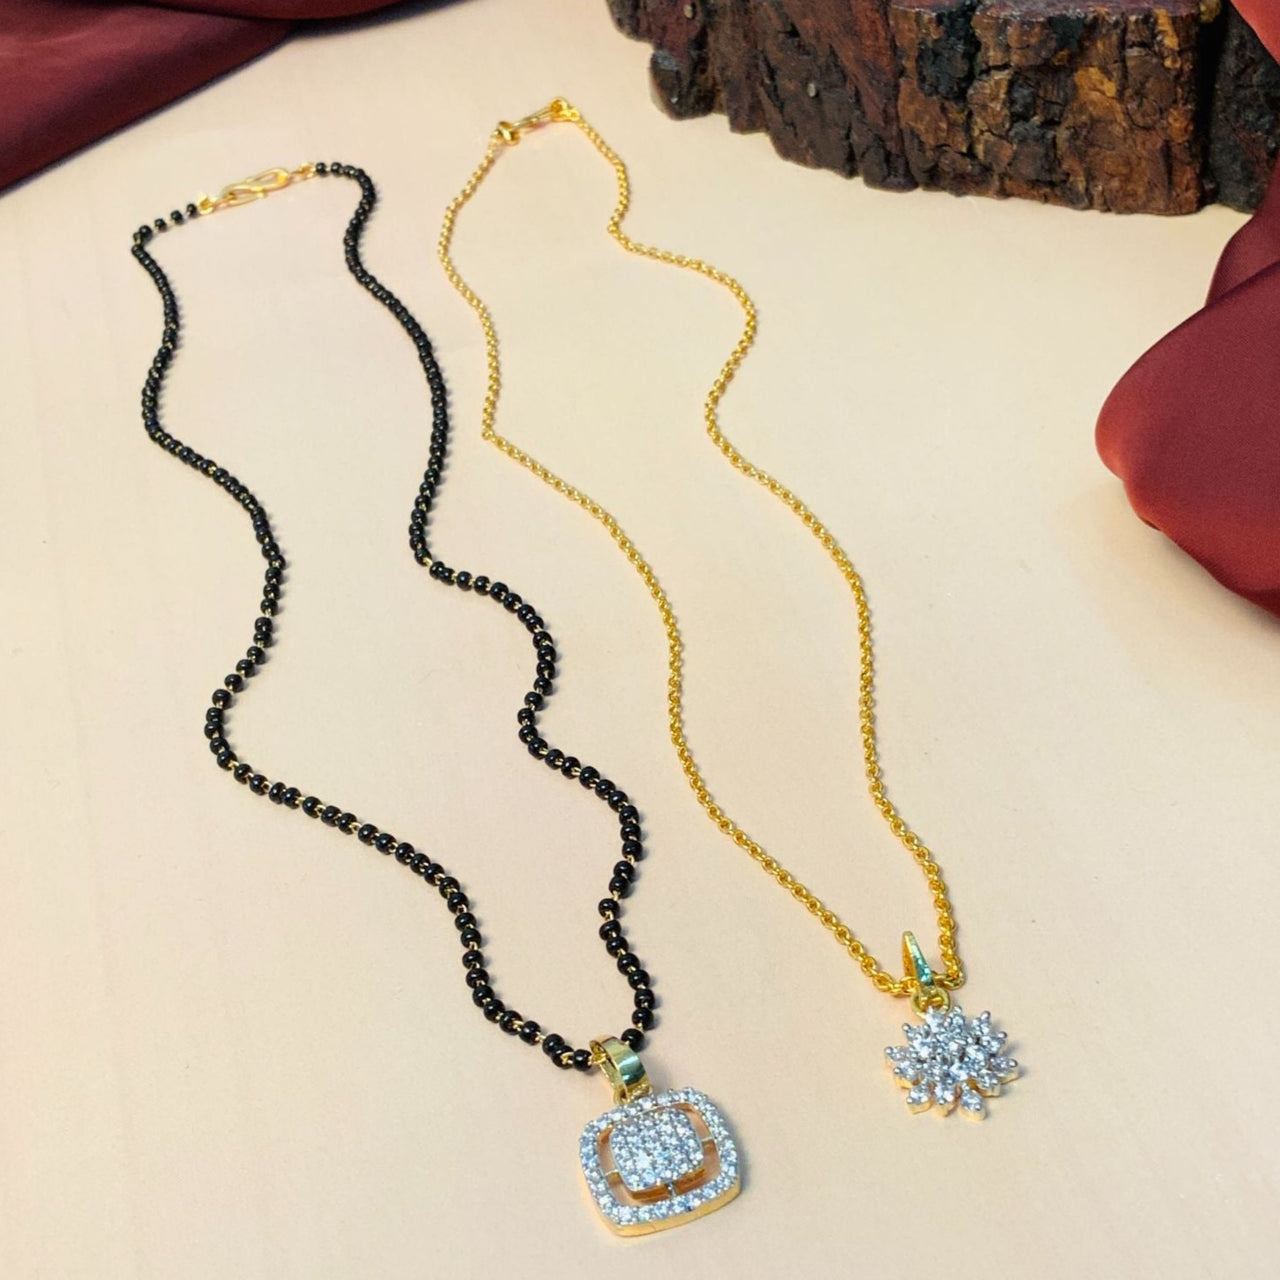 Exclusive High Quality Gold Plated American Diamond Mangalsutra & Pendant Chain Combo